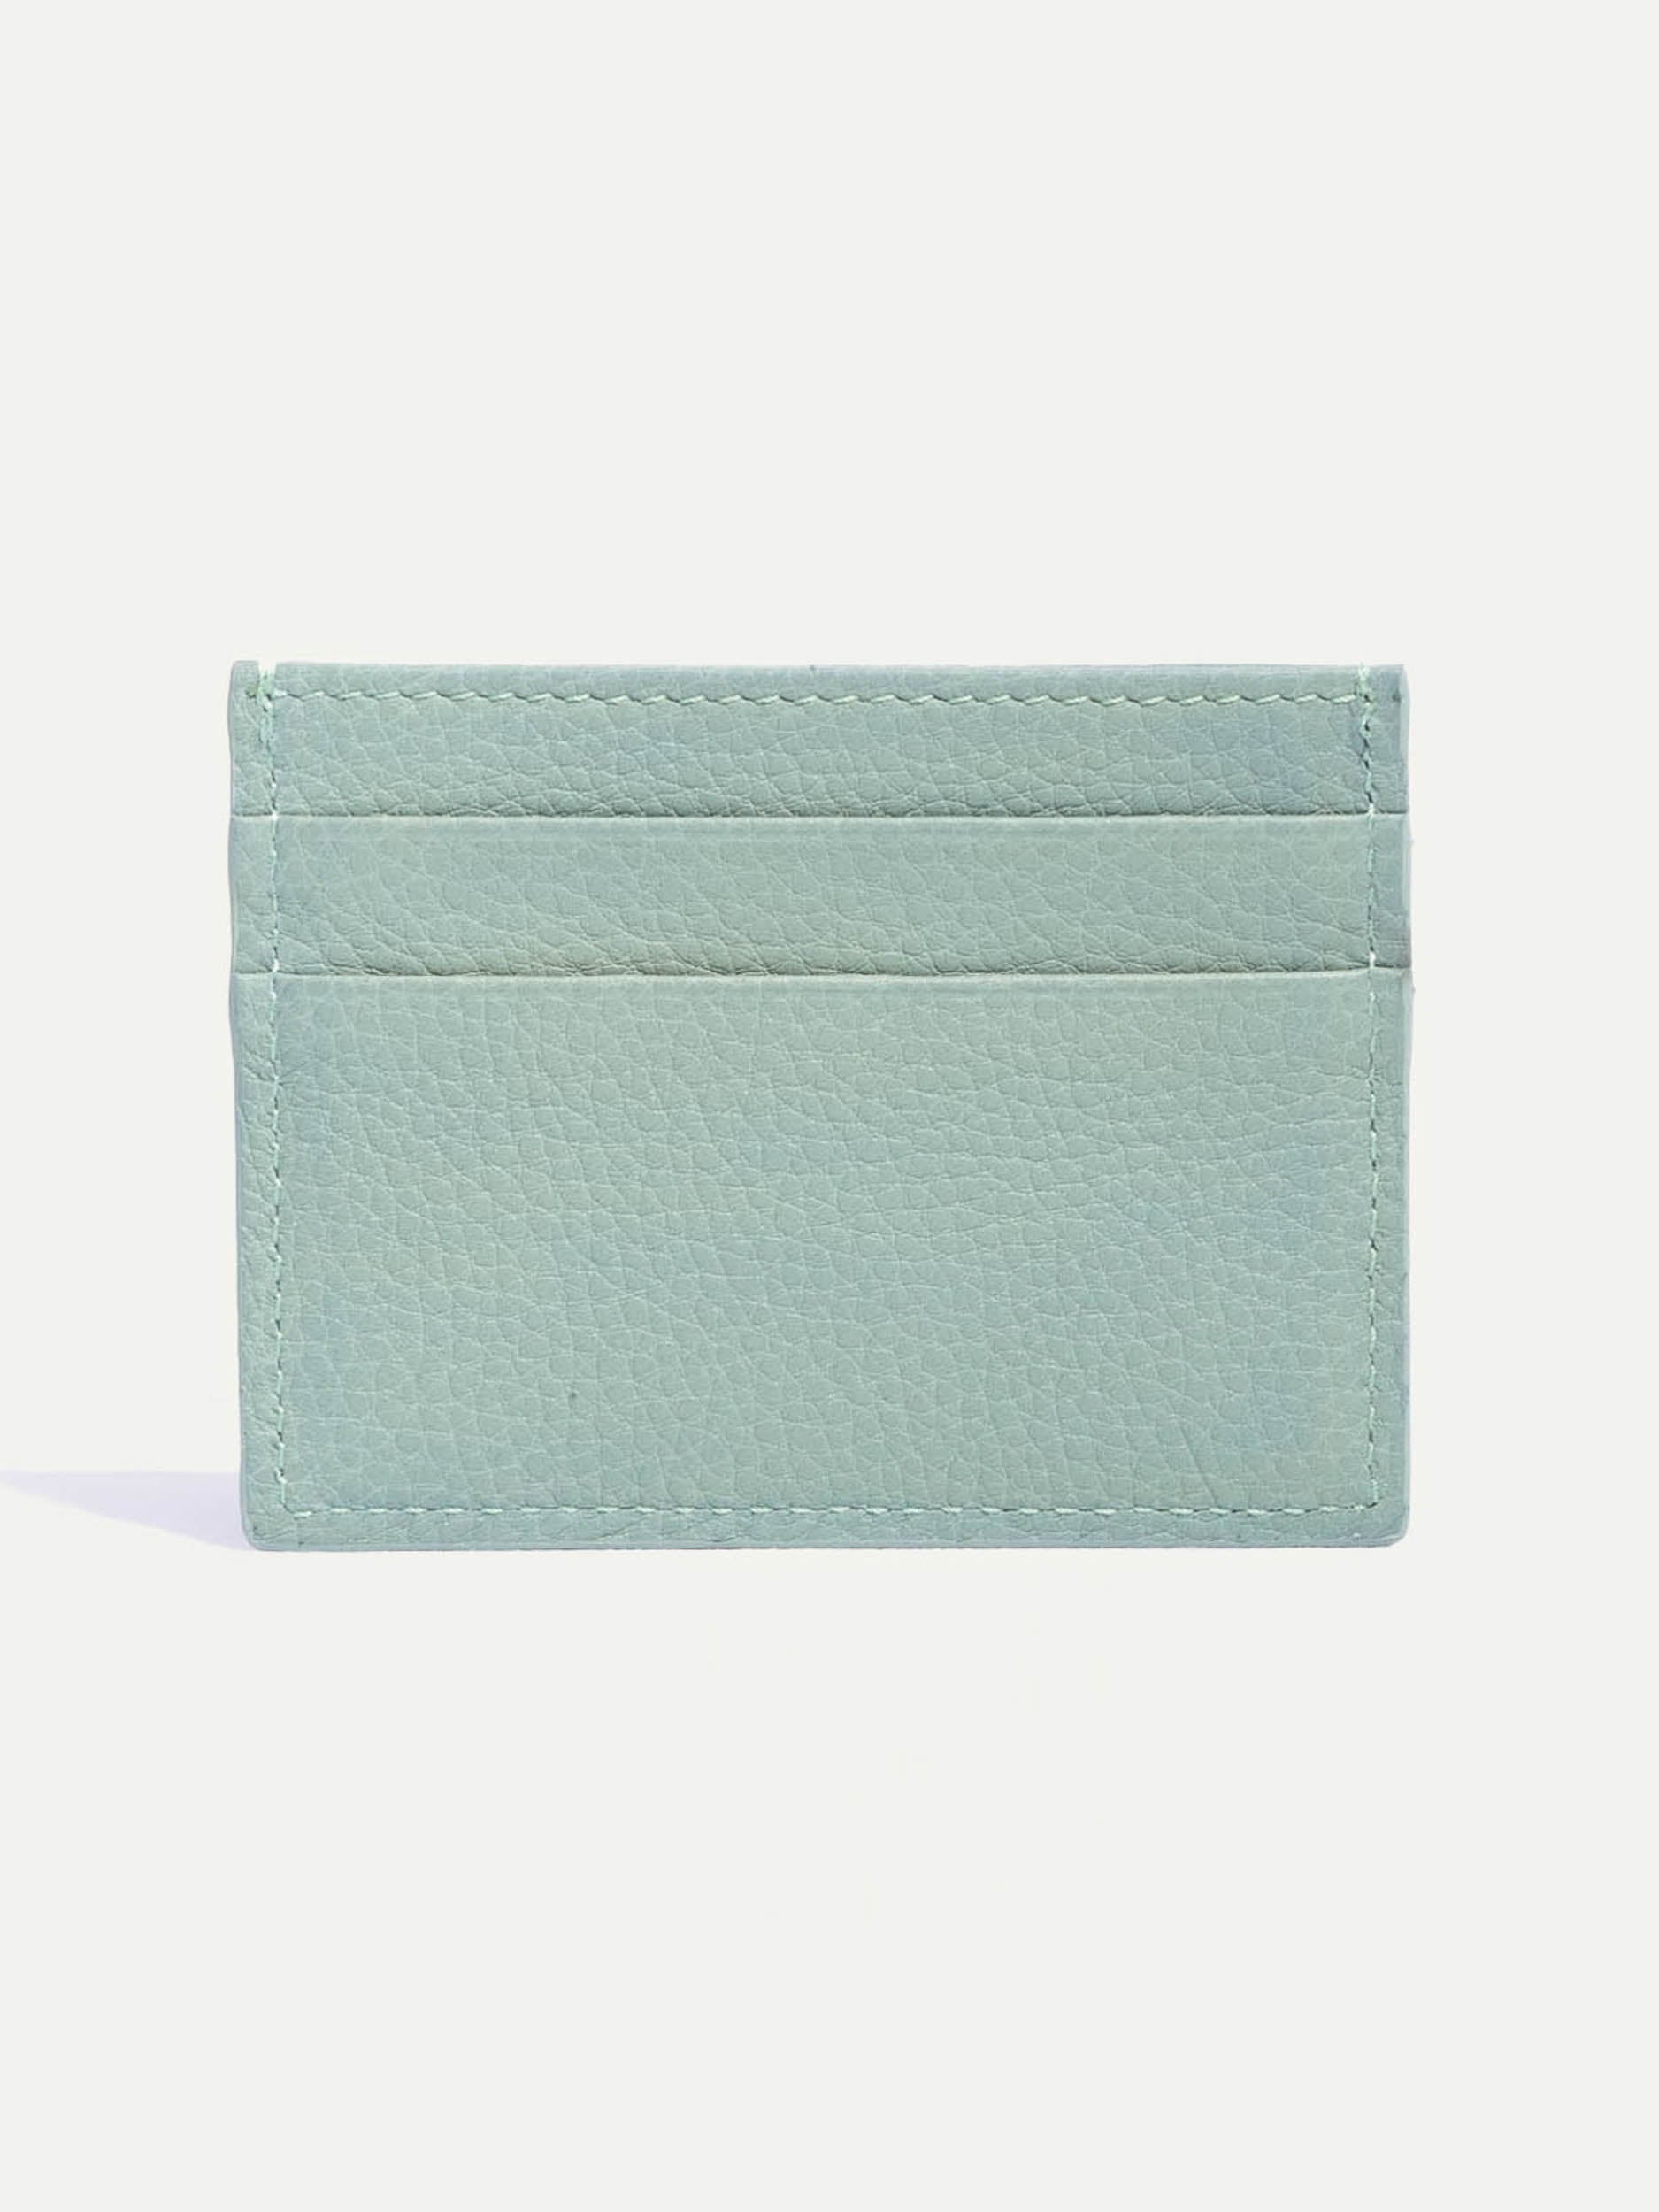 Verde acqua leather card holder - Made in Italy